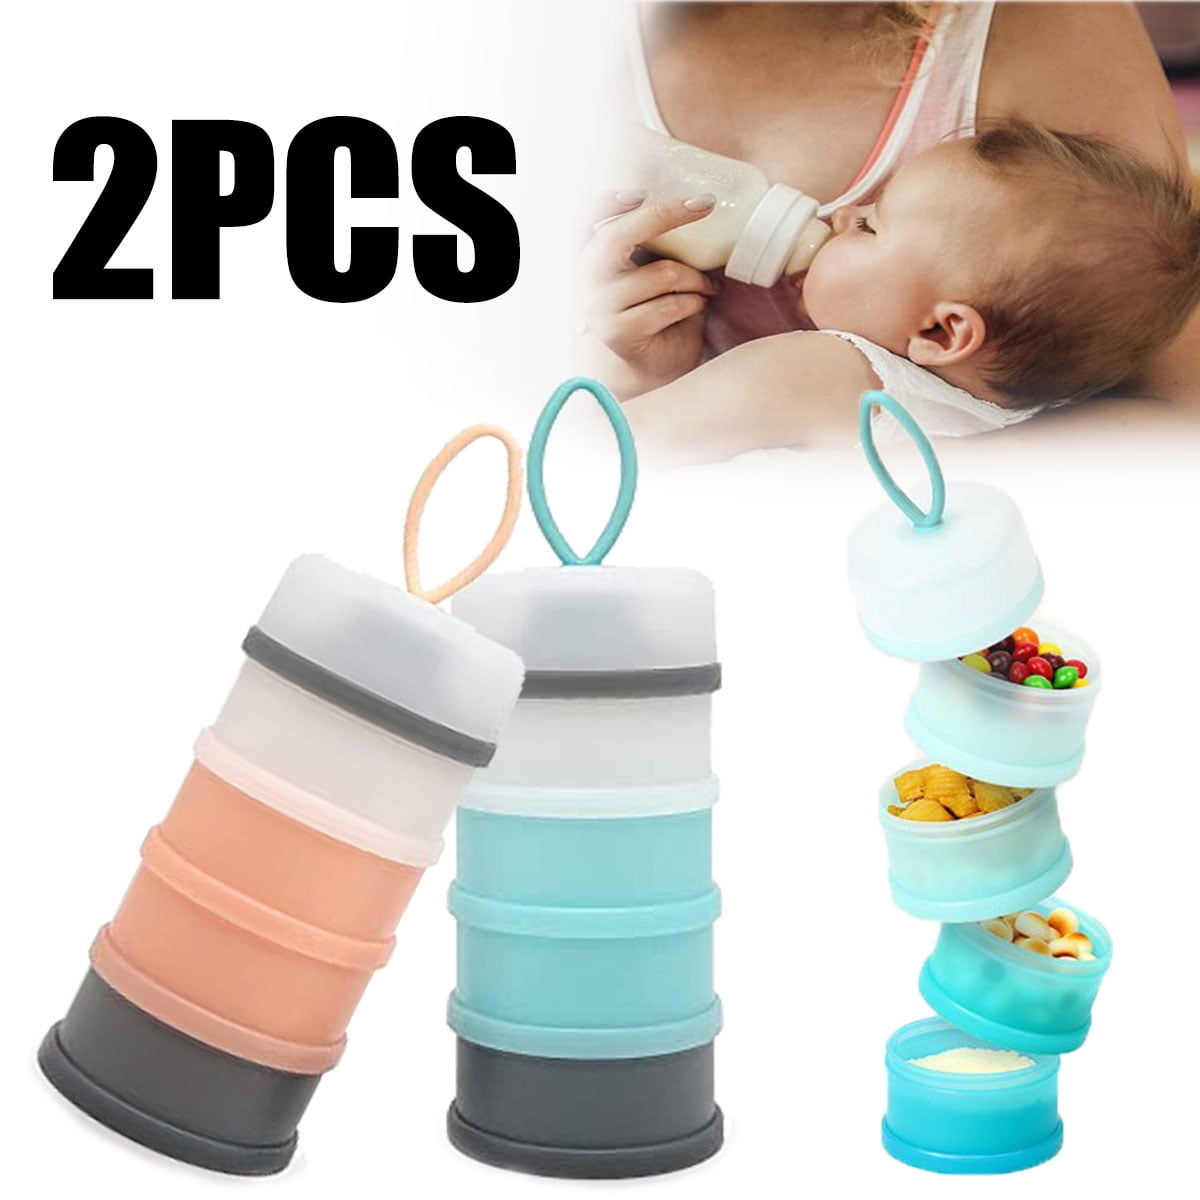 1pc Portable Baby Food Rice Powder Sealed Can, Travel Mother & Baby  Supplies Milk Powder Storage Box, Infant & Toddler Snack Compartment  Organizer